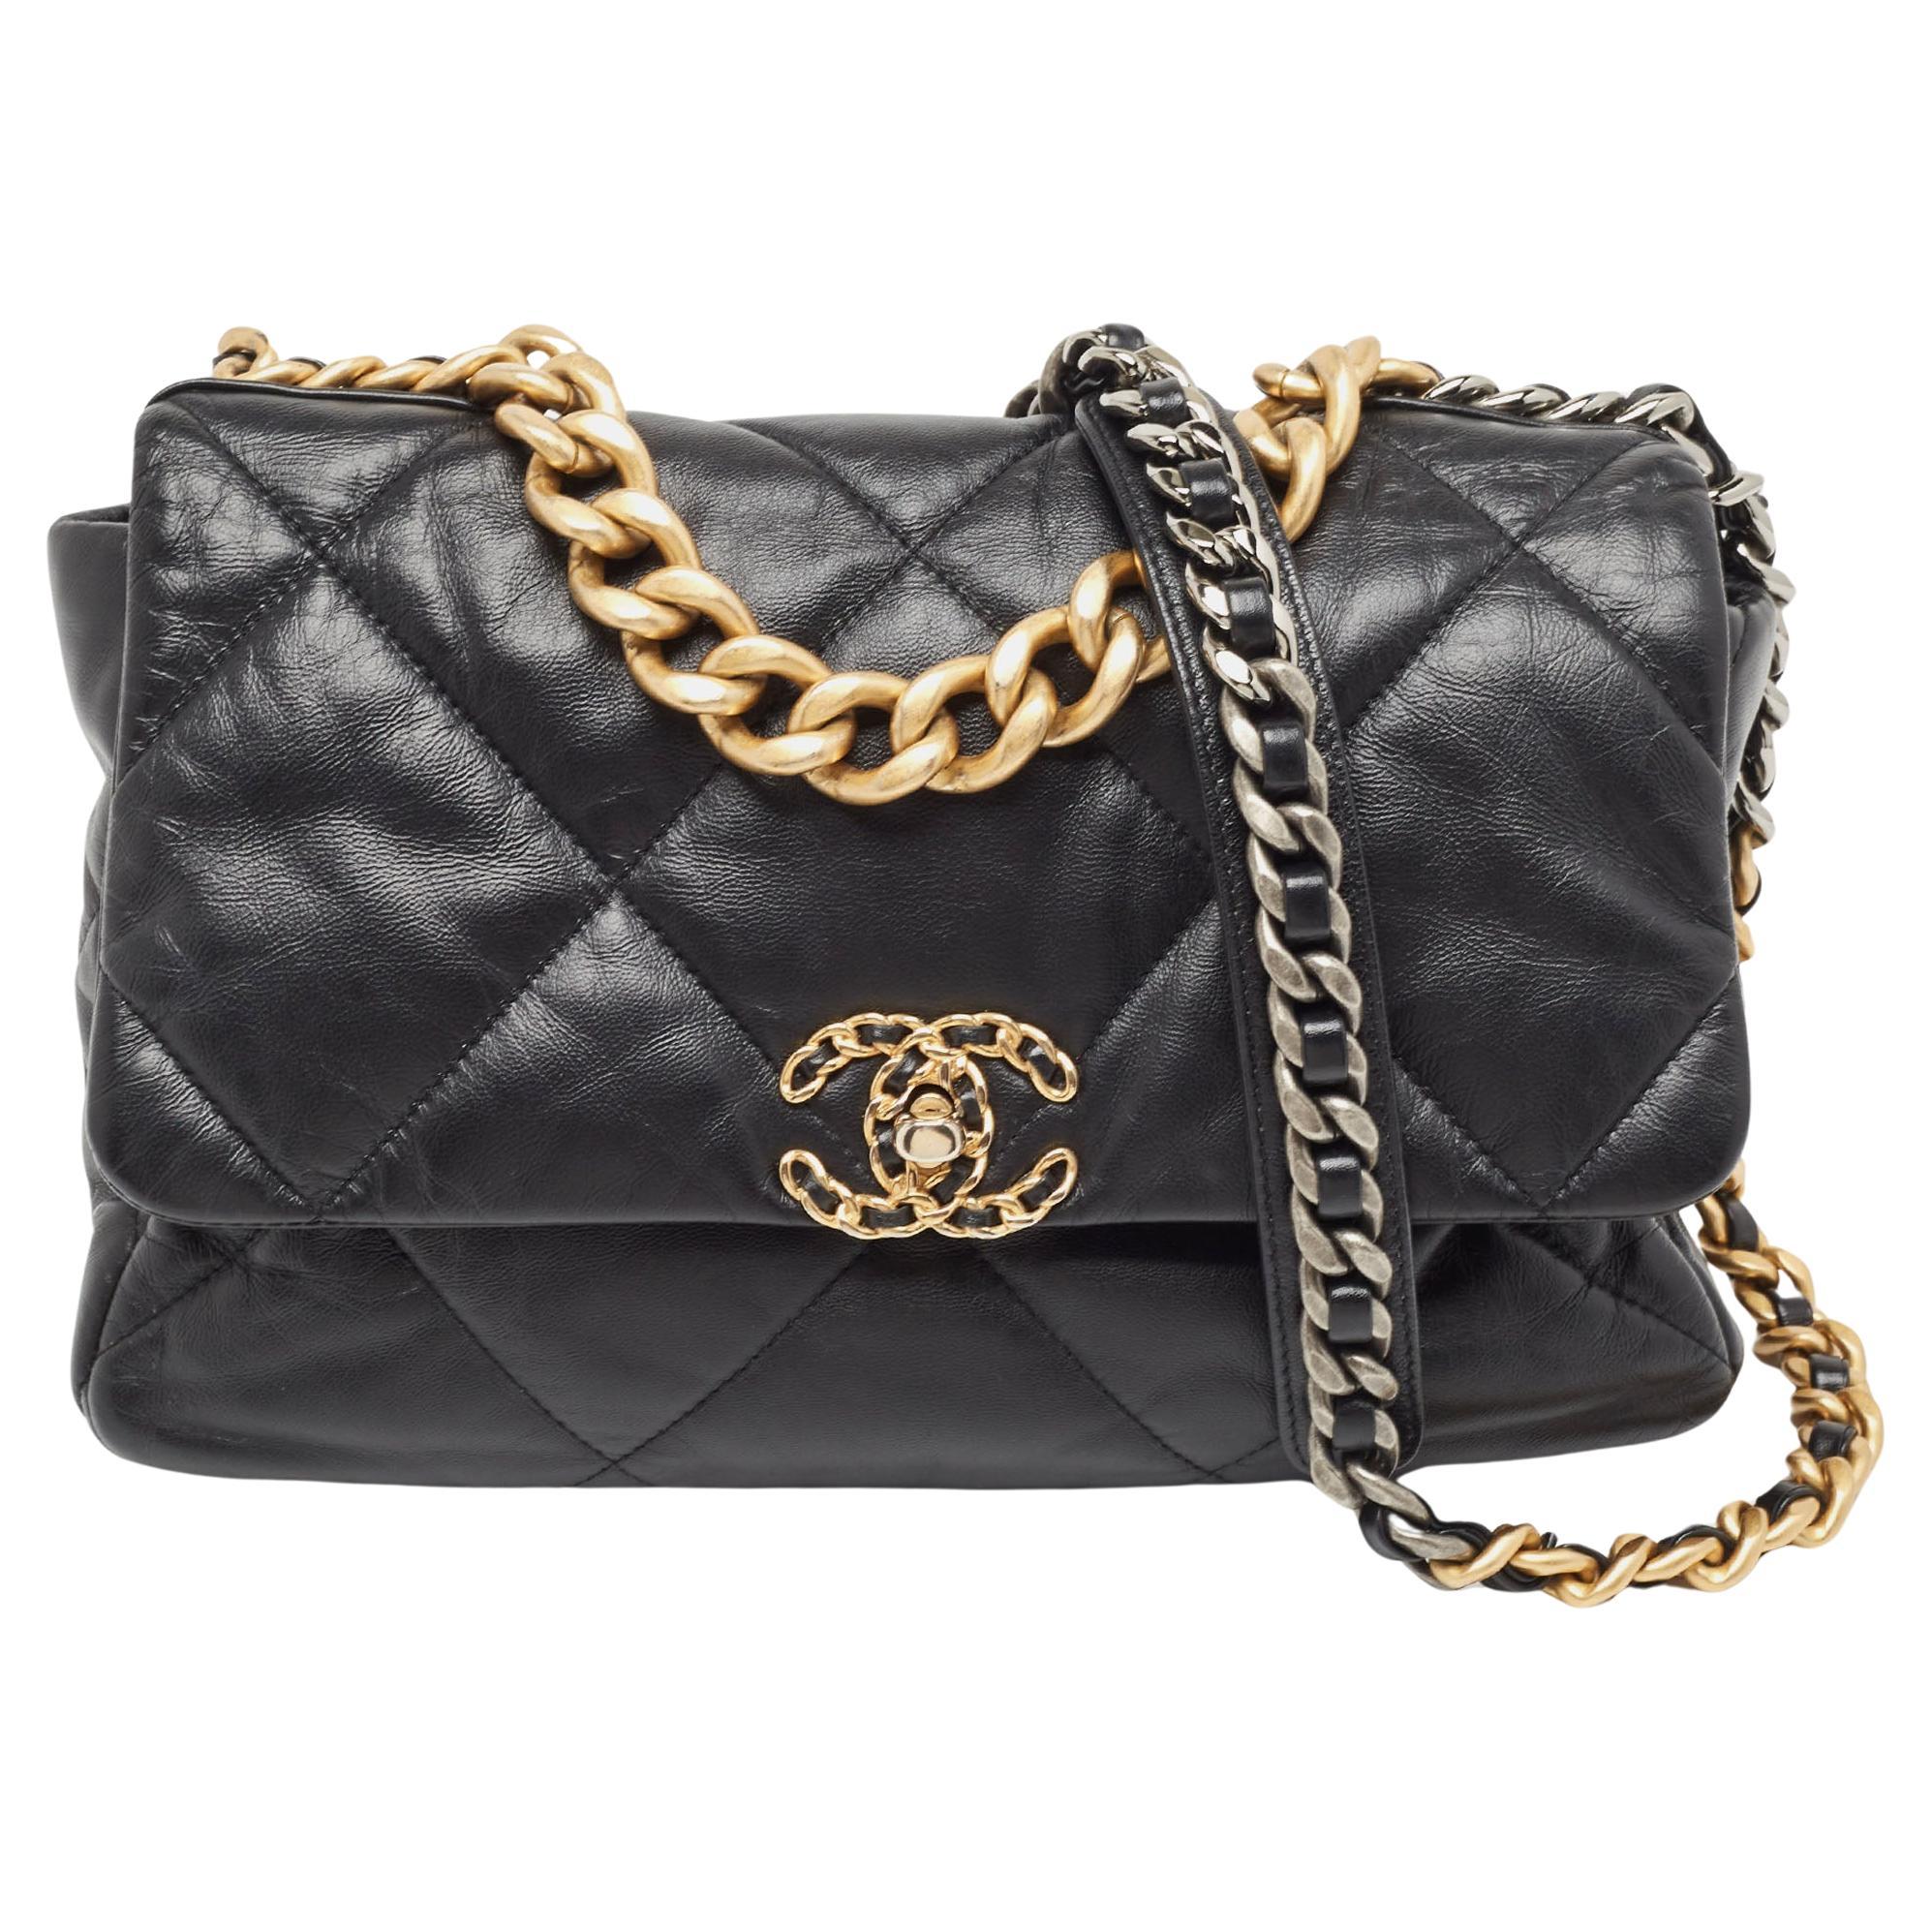 Chanel Black Quilted Leather Large 19 Flap Bag For Sale